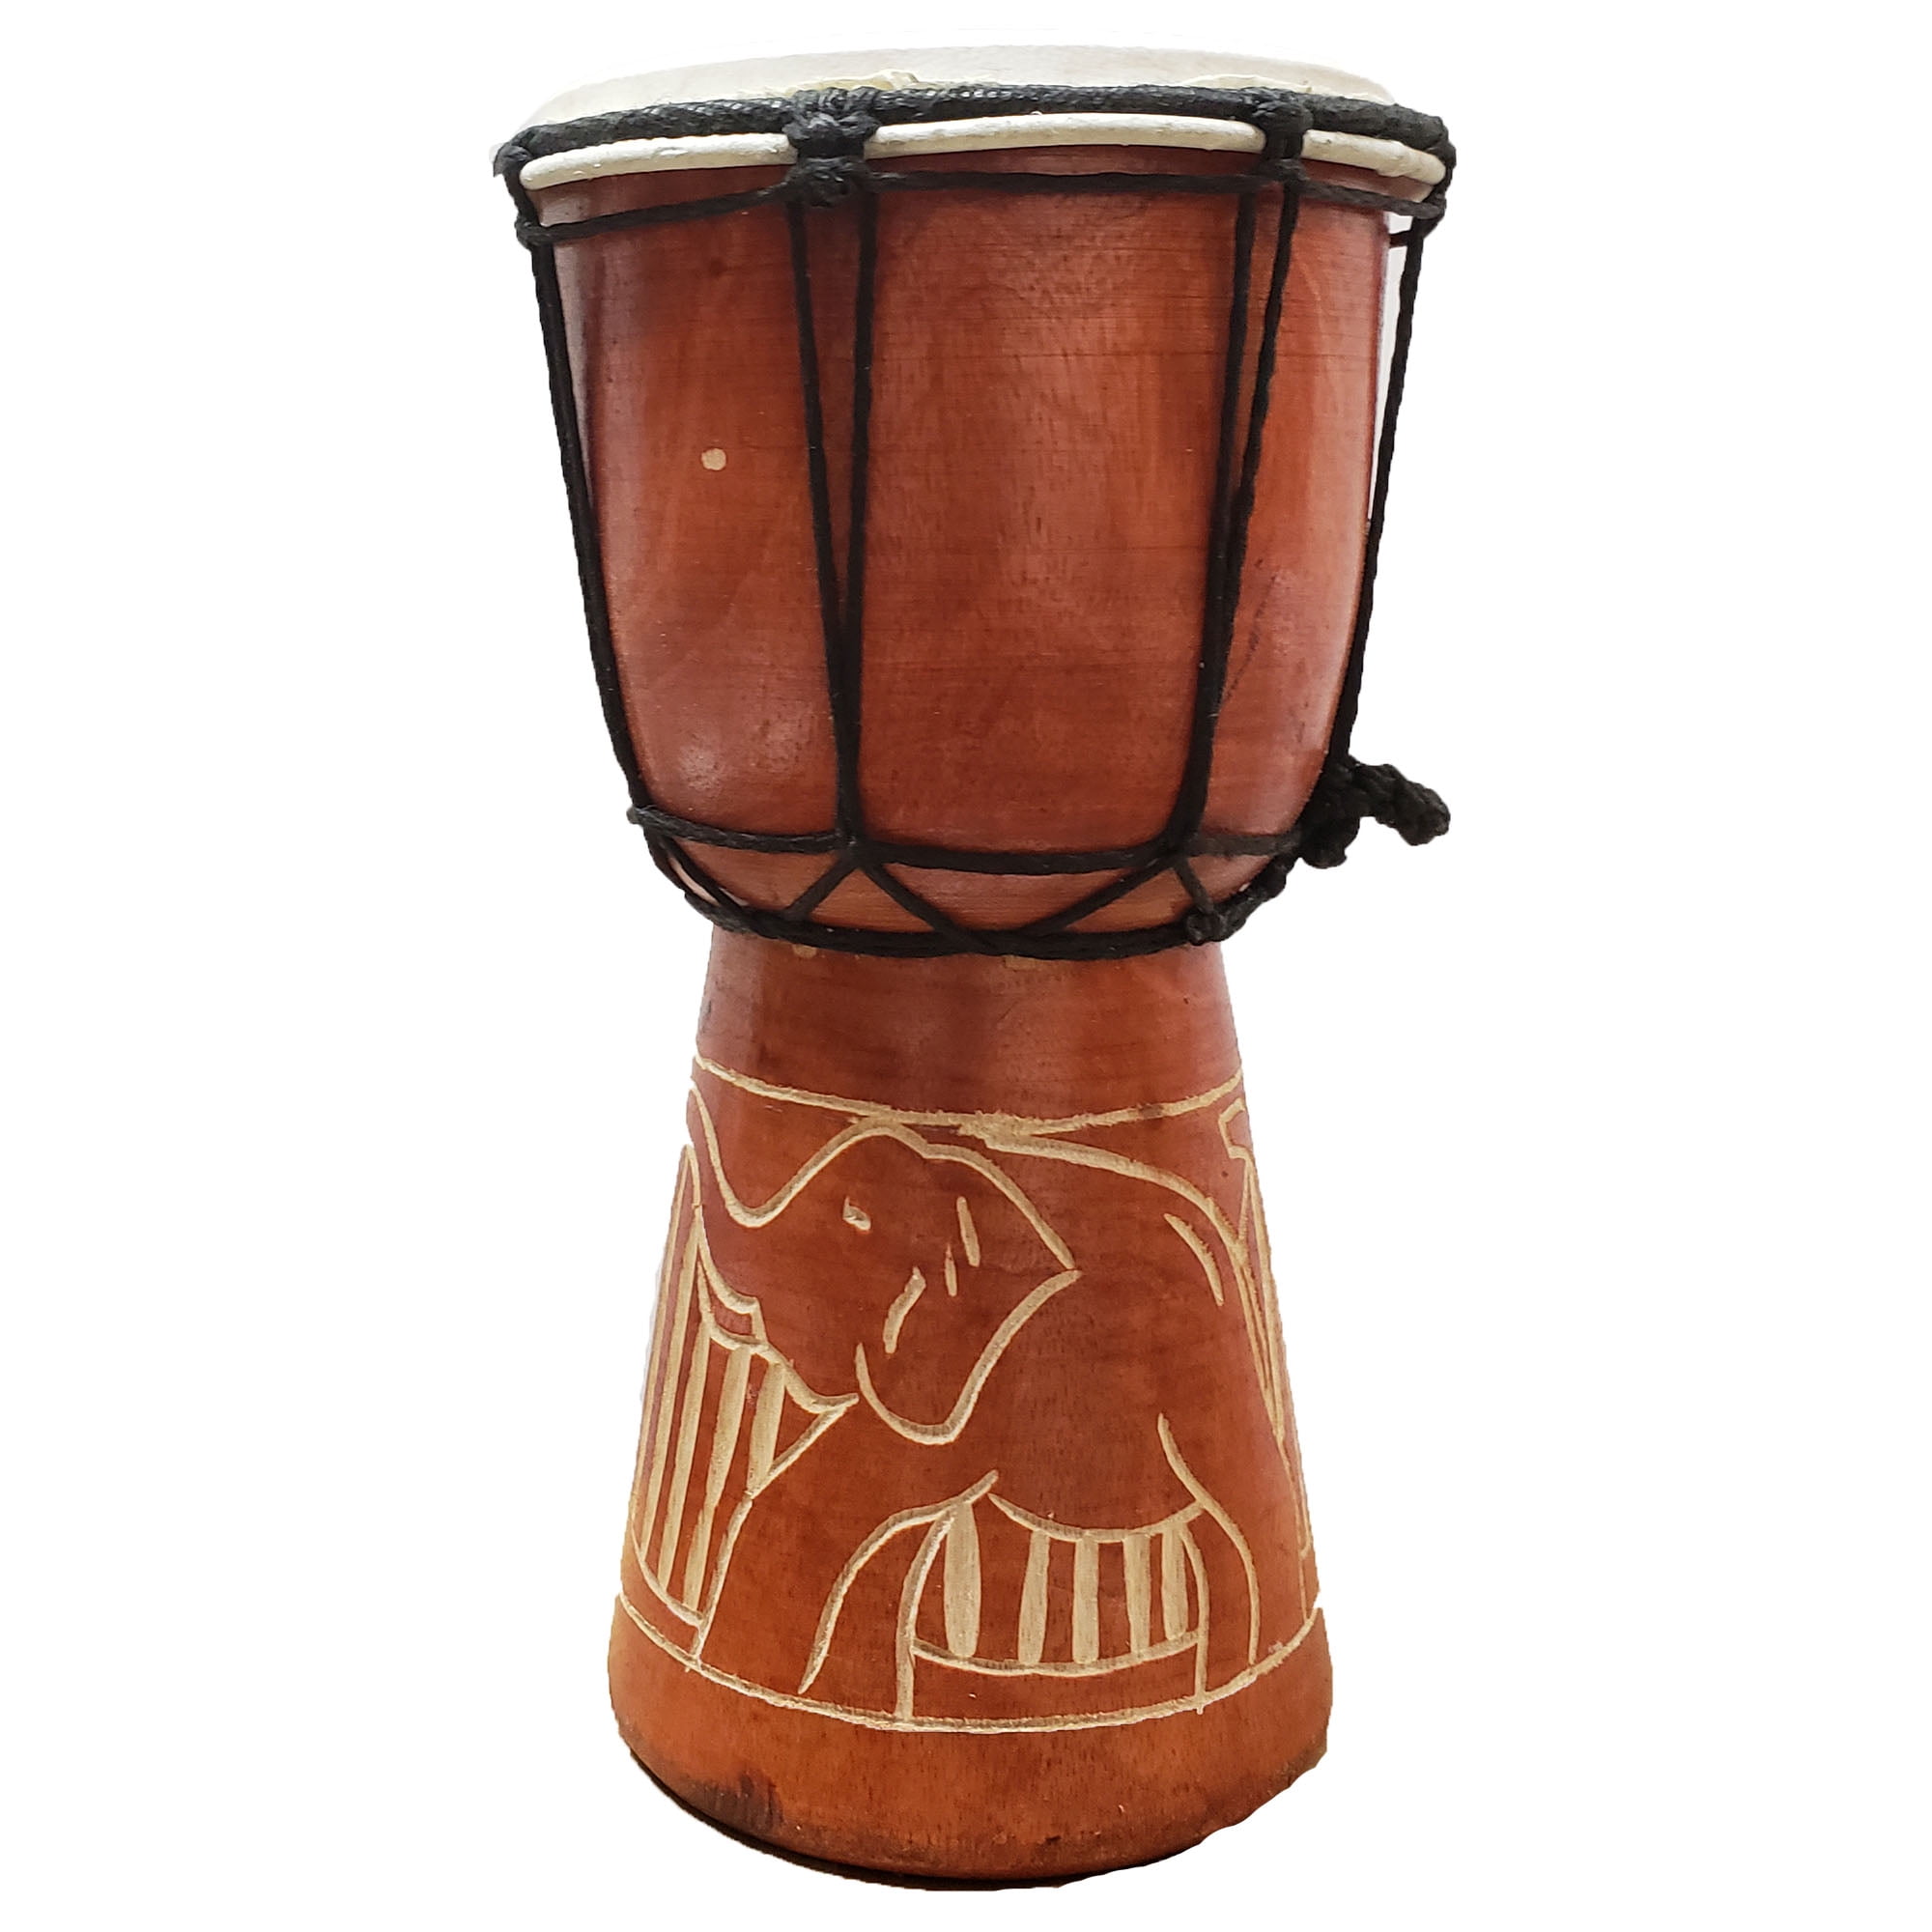 12 Inch, Turtle Djembe Drum Carved Bongo African inspired music beginners for kids and adults also a unique gifting idea Carver Abstract Elephant Giraffe Turtle. 